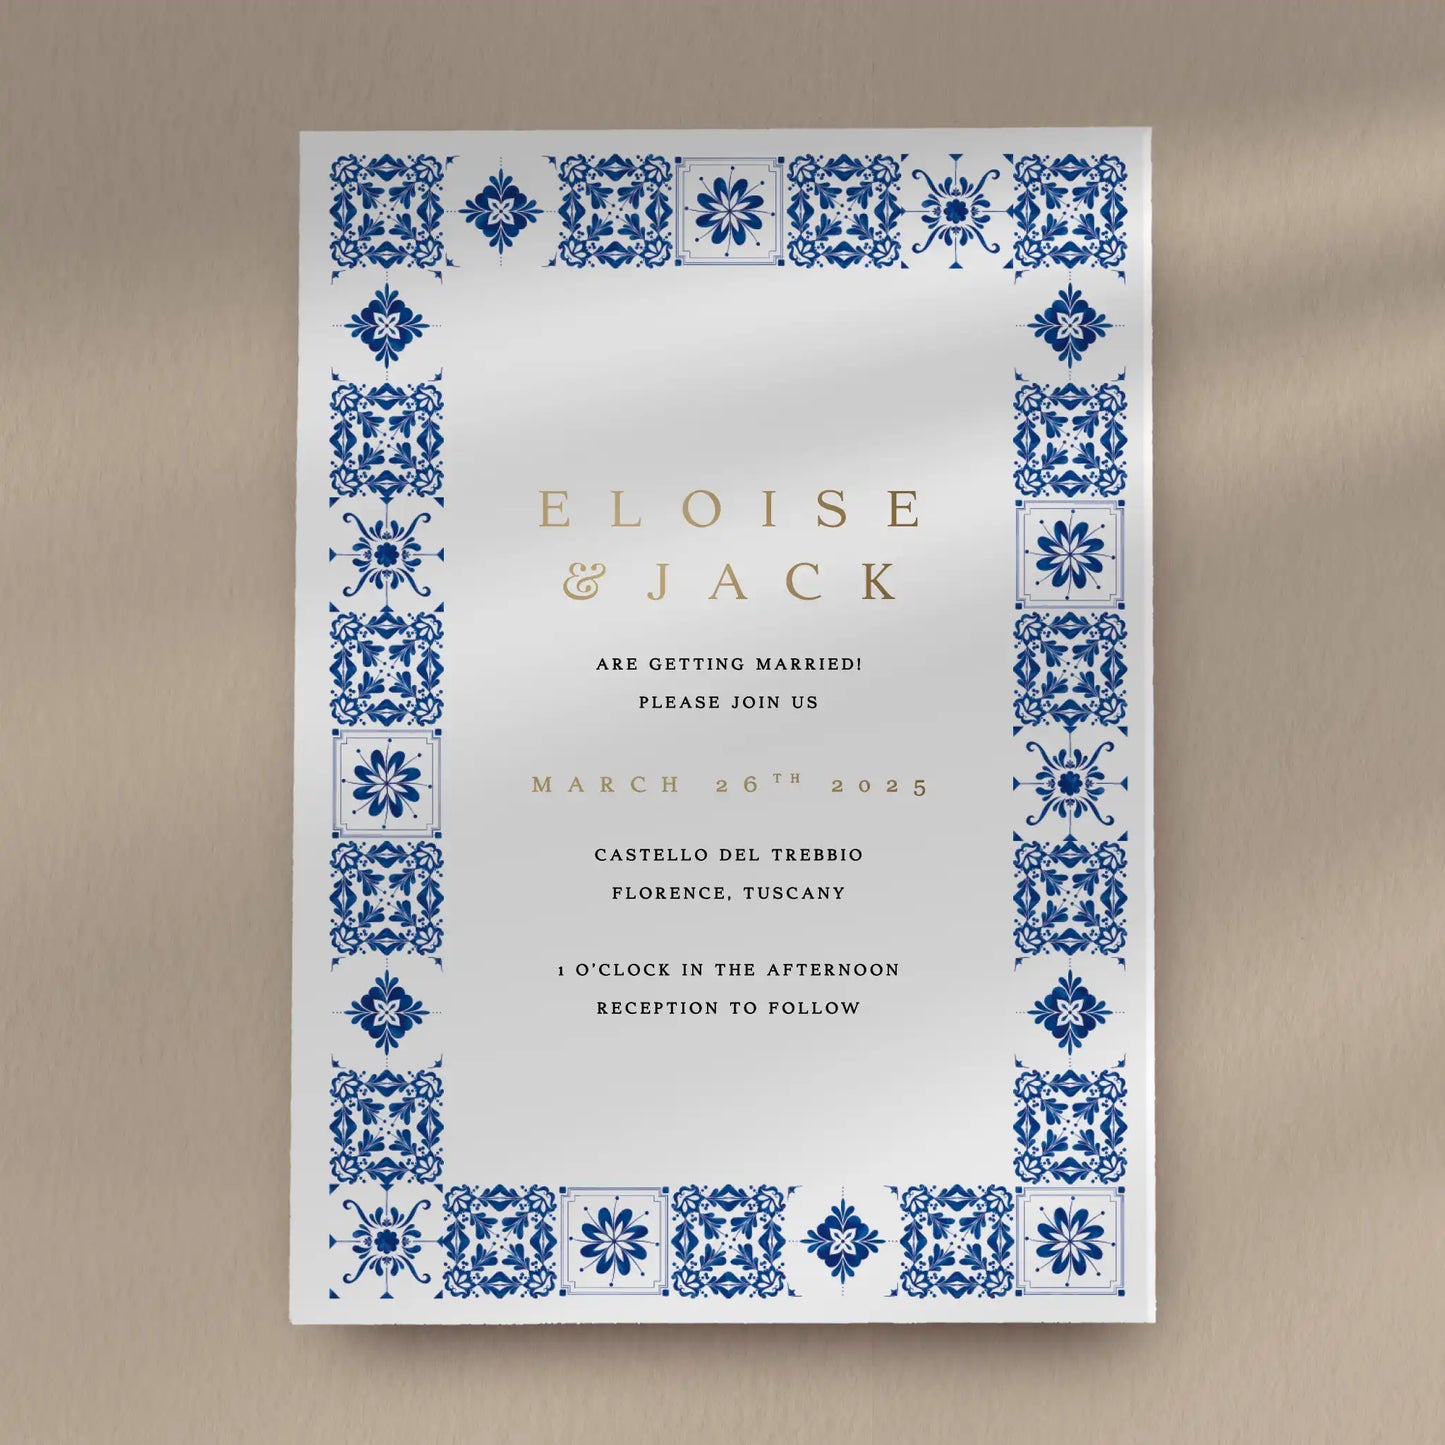 Day Invitation Sample  Ivy and Gold Wedding Stationery Eloise  